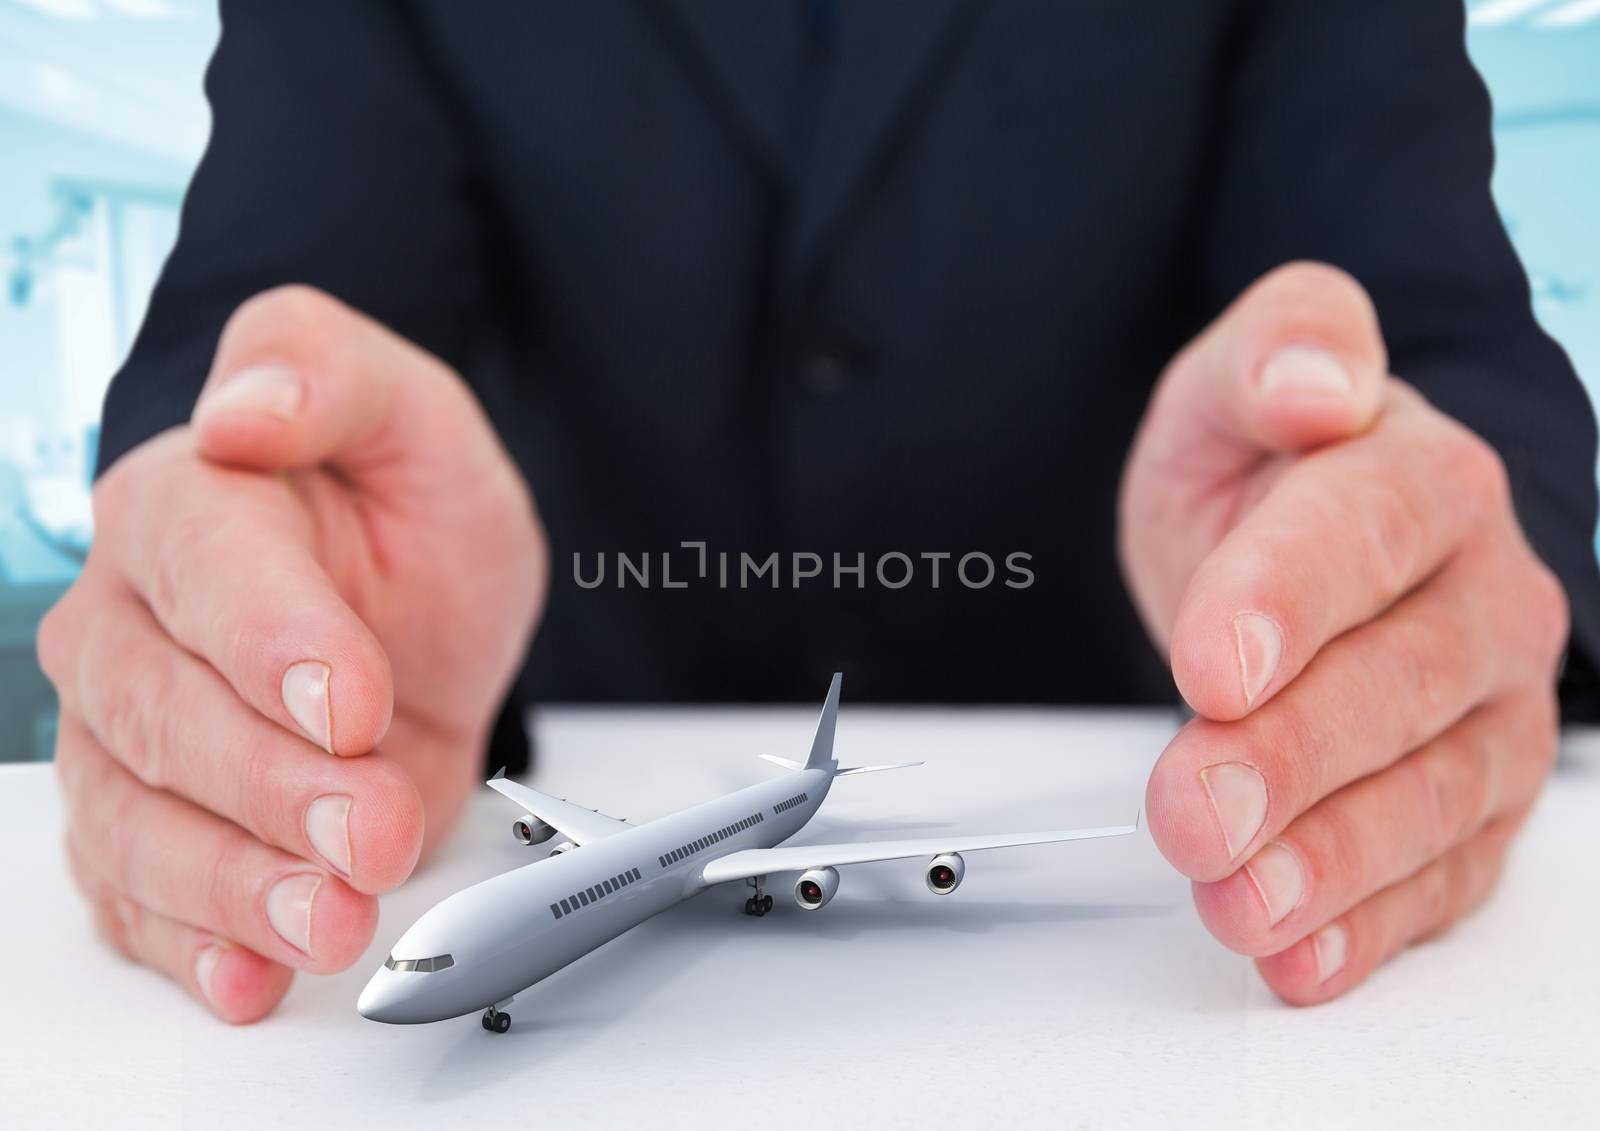 Airplane model surrounded by hands in gesture of protection by Wavebreakmedia